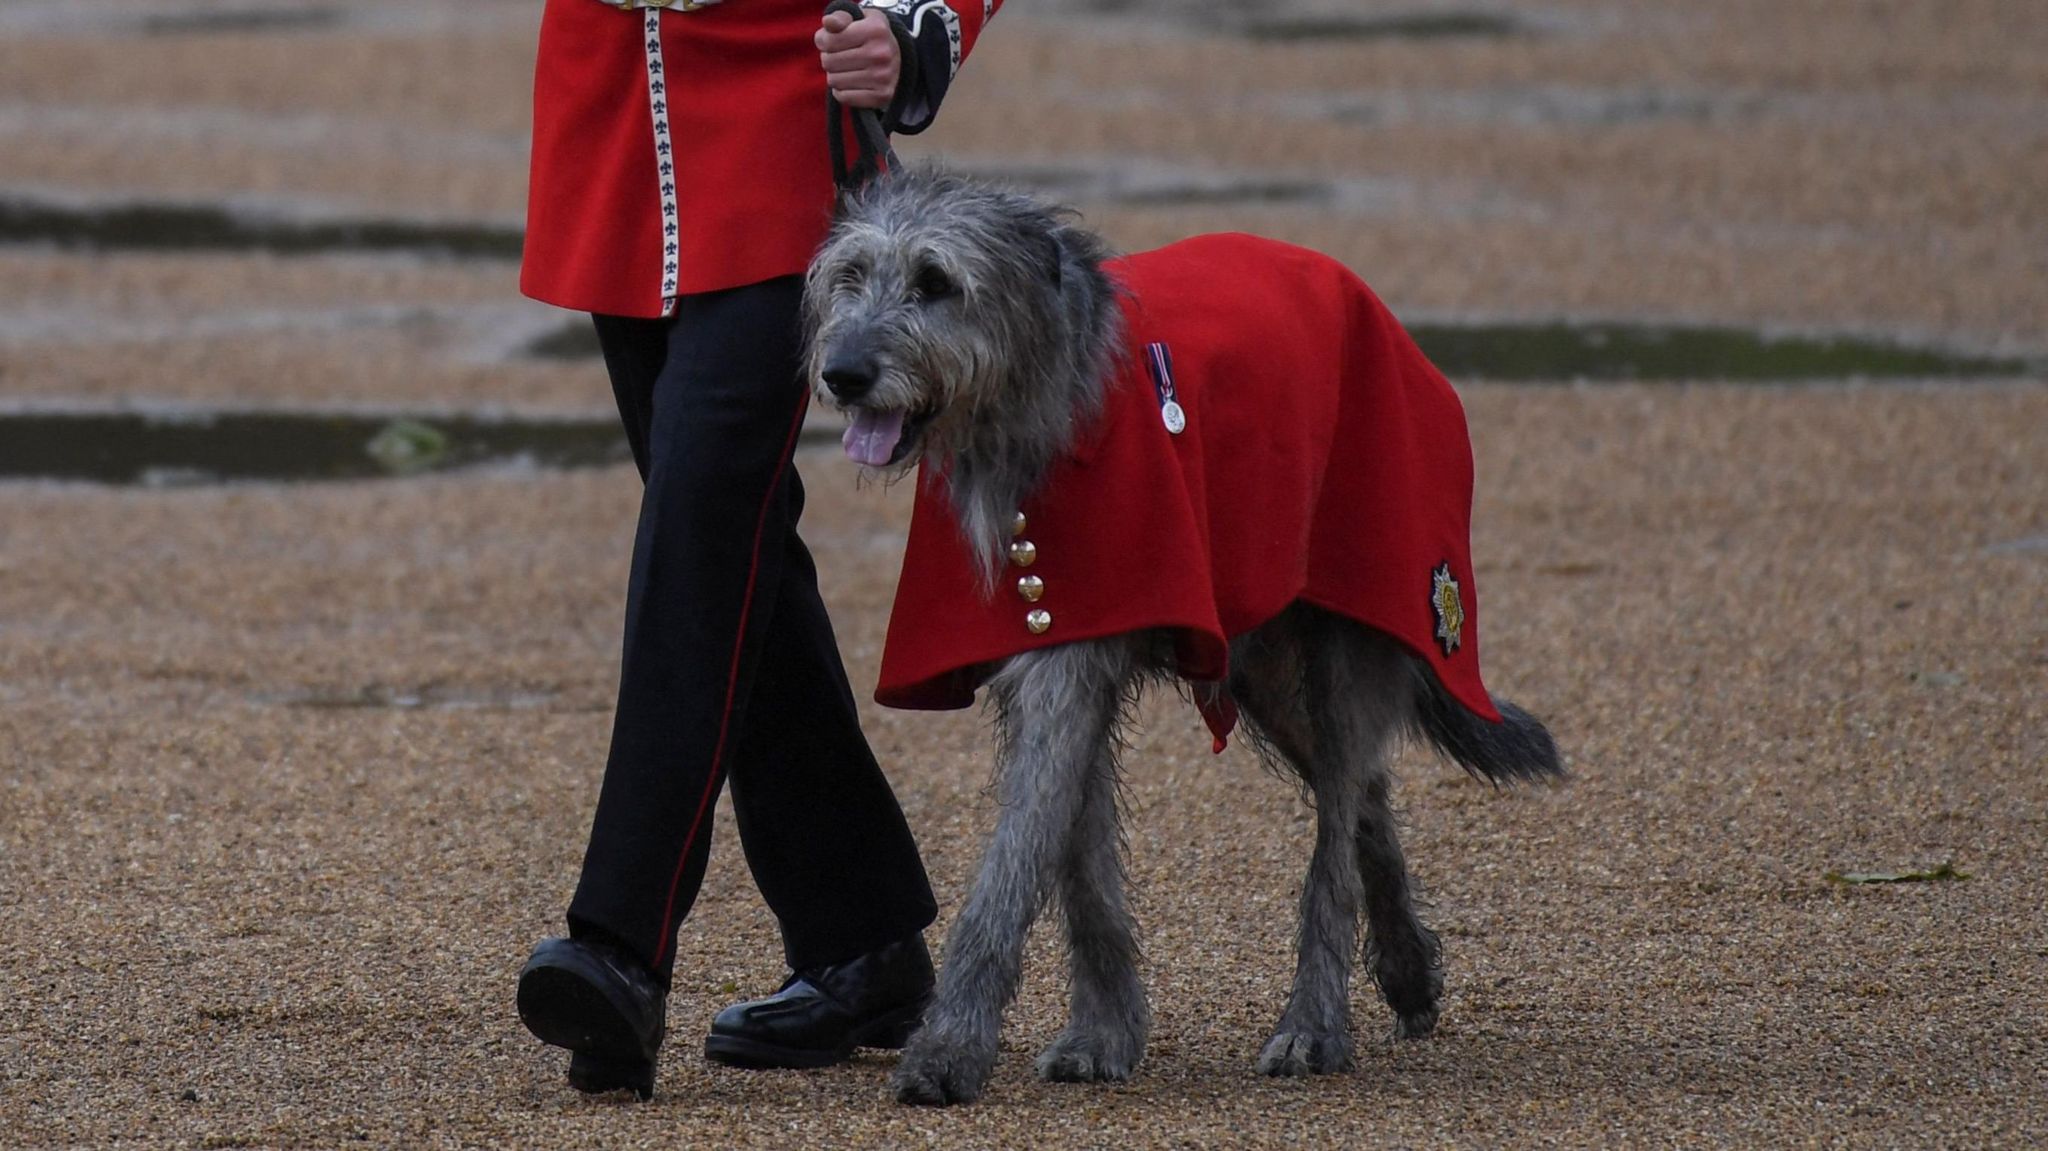 Seamus the dog with his tongue out and red outfit on, being led by soldier